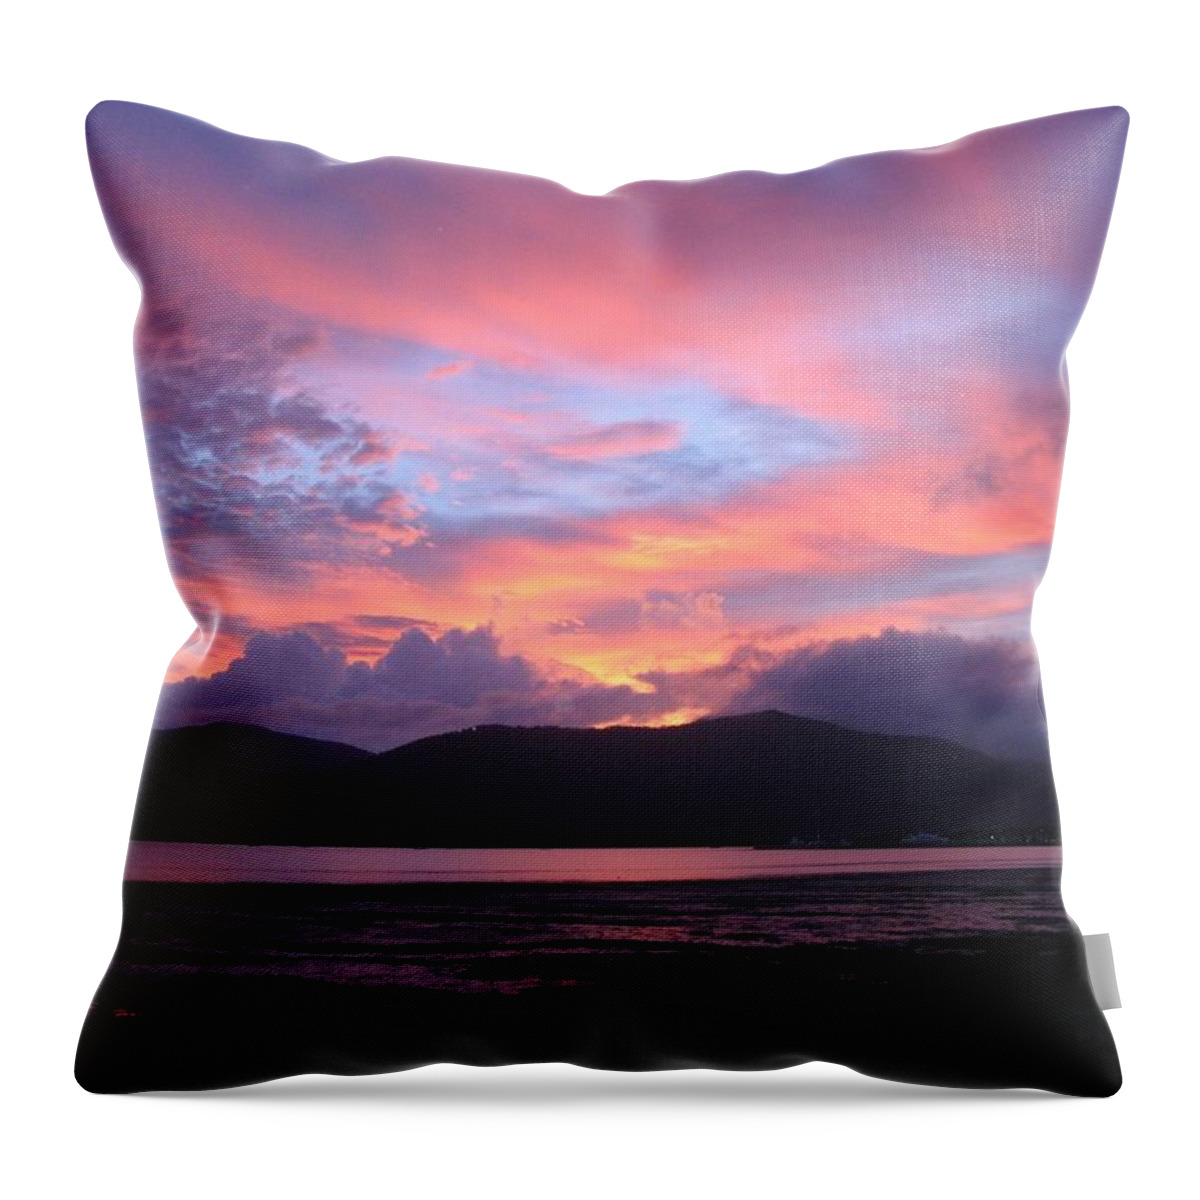 Cairns Throw Pillow featuring the photograph Cairn's Sunrise by Diane Sleger